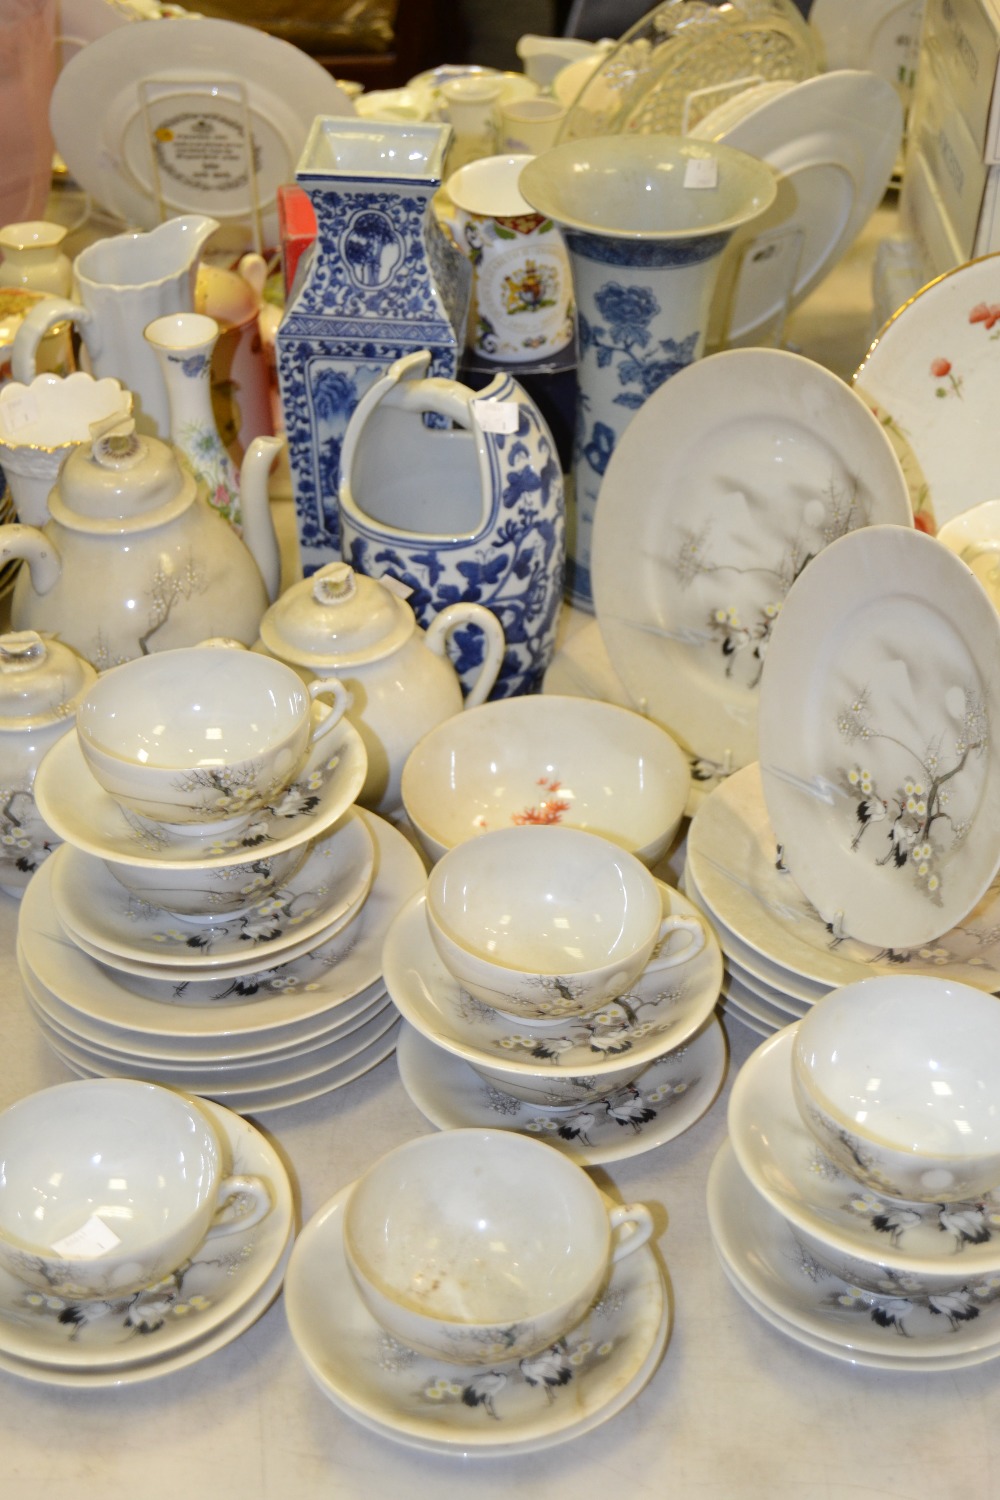 A Japanese eggshell porcelain export ware tea service including teapot, cups, saucers, side plates